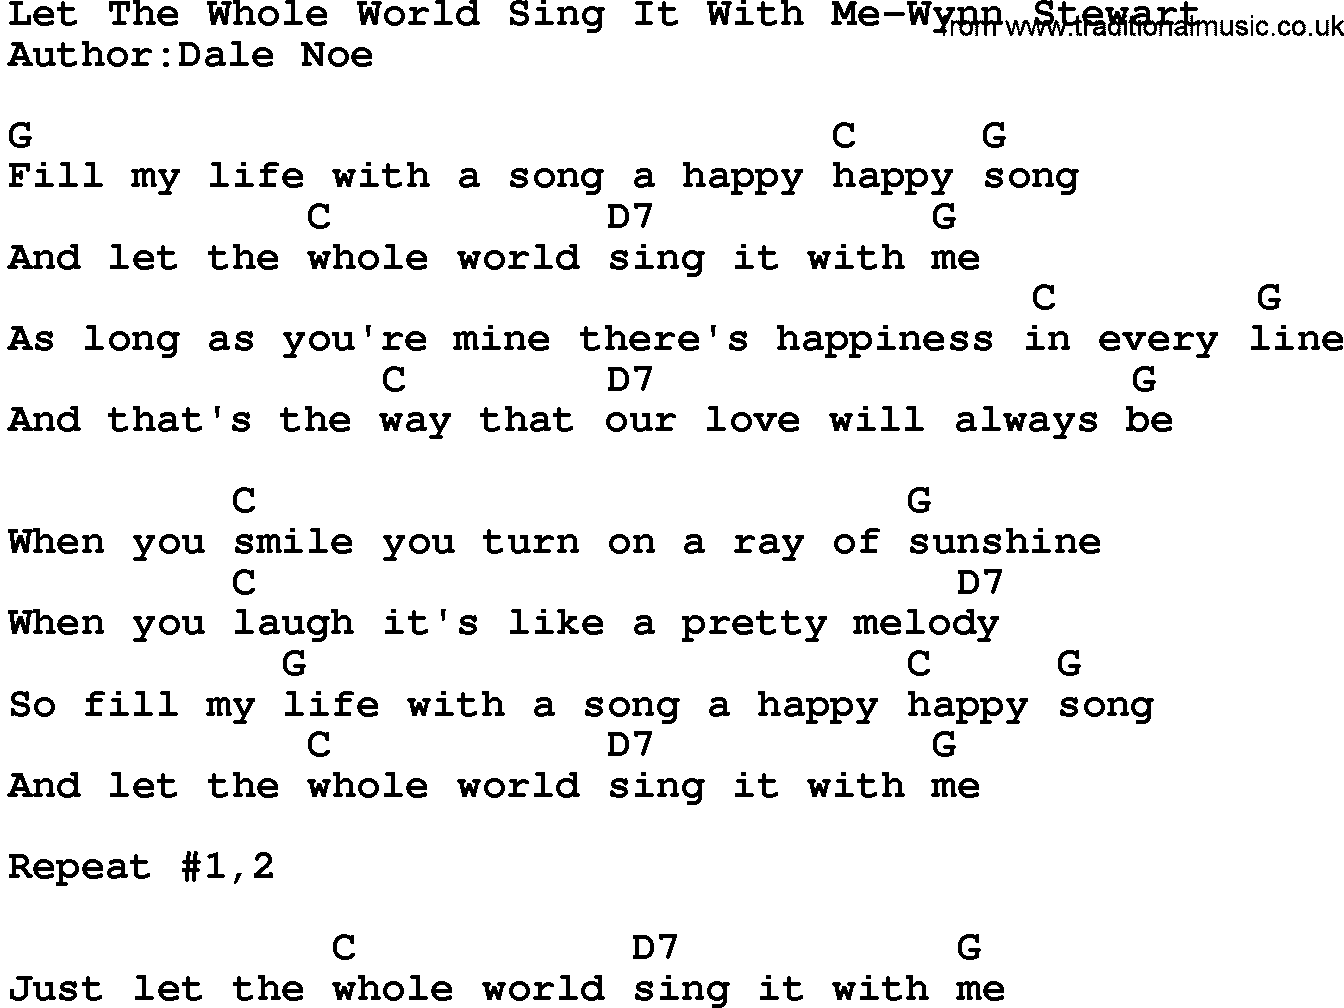 Country music song: Let The Whole World Sing It With Me-Wynn Stewart lyrics and chords